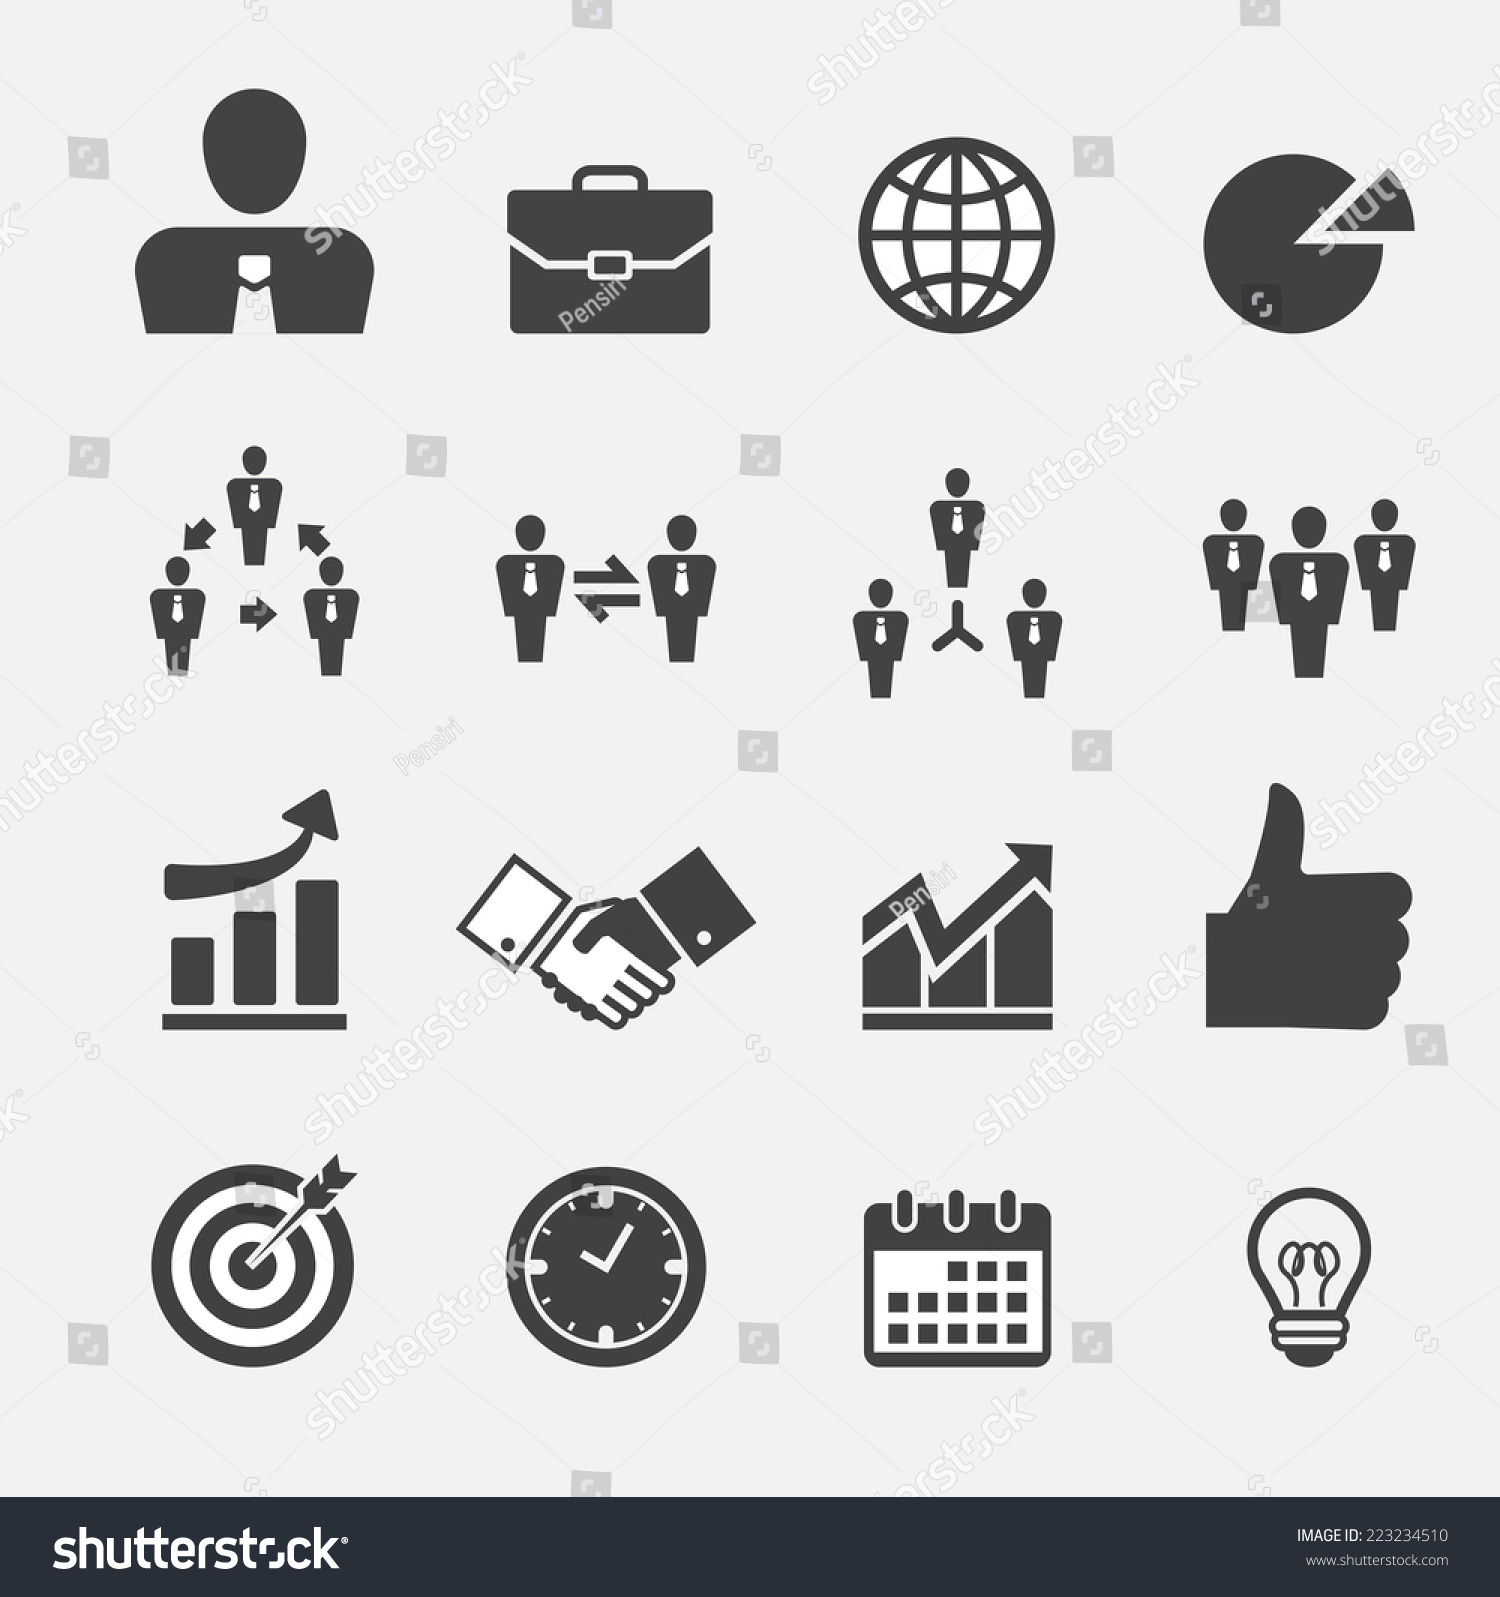 Business Icon Stock Vector 223234510 : Shutterstock